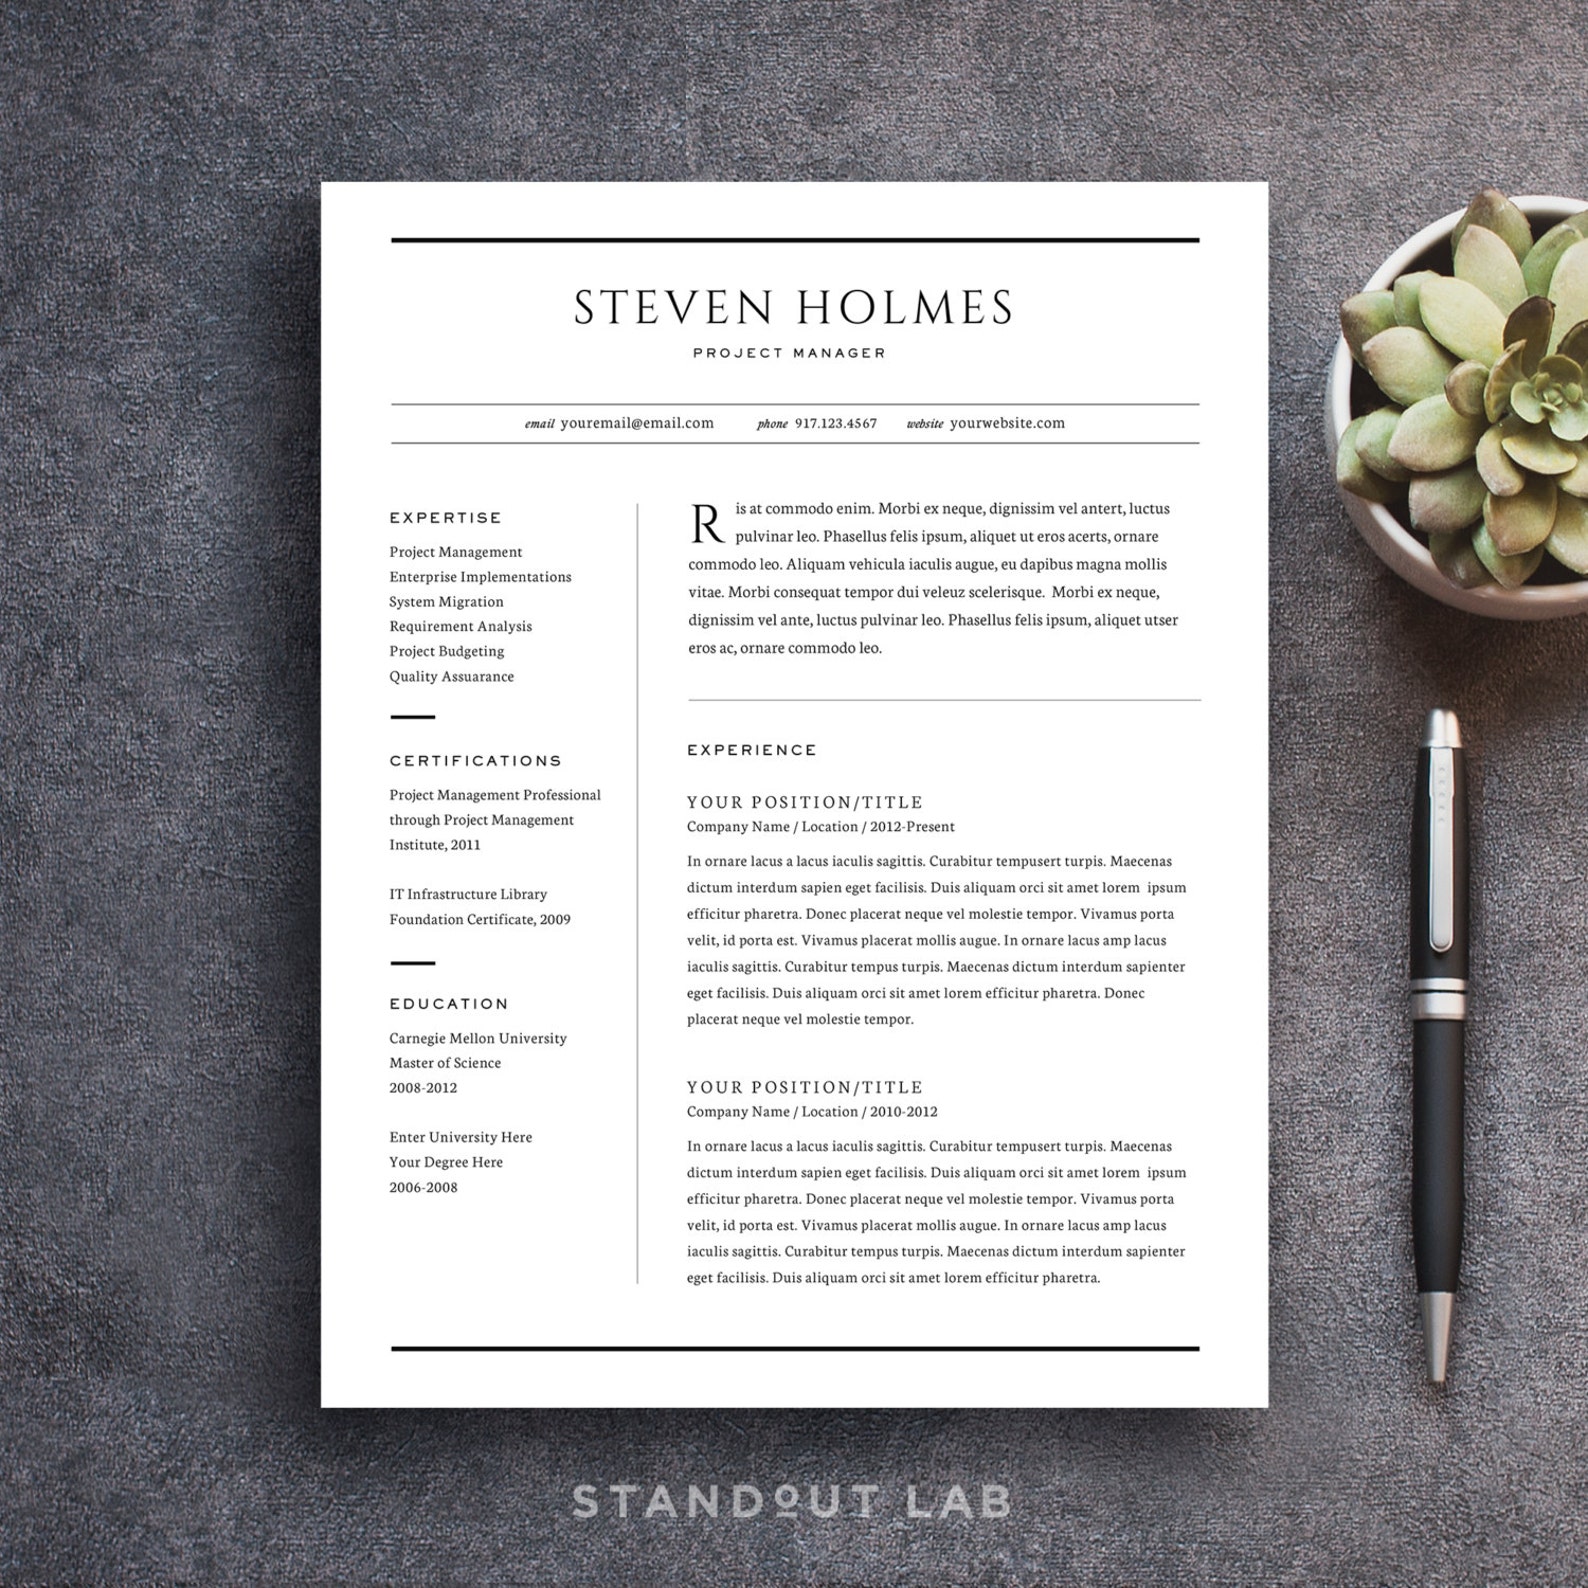 etsy resume and cover letter templates